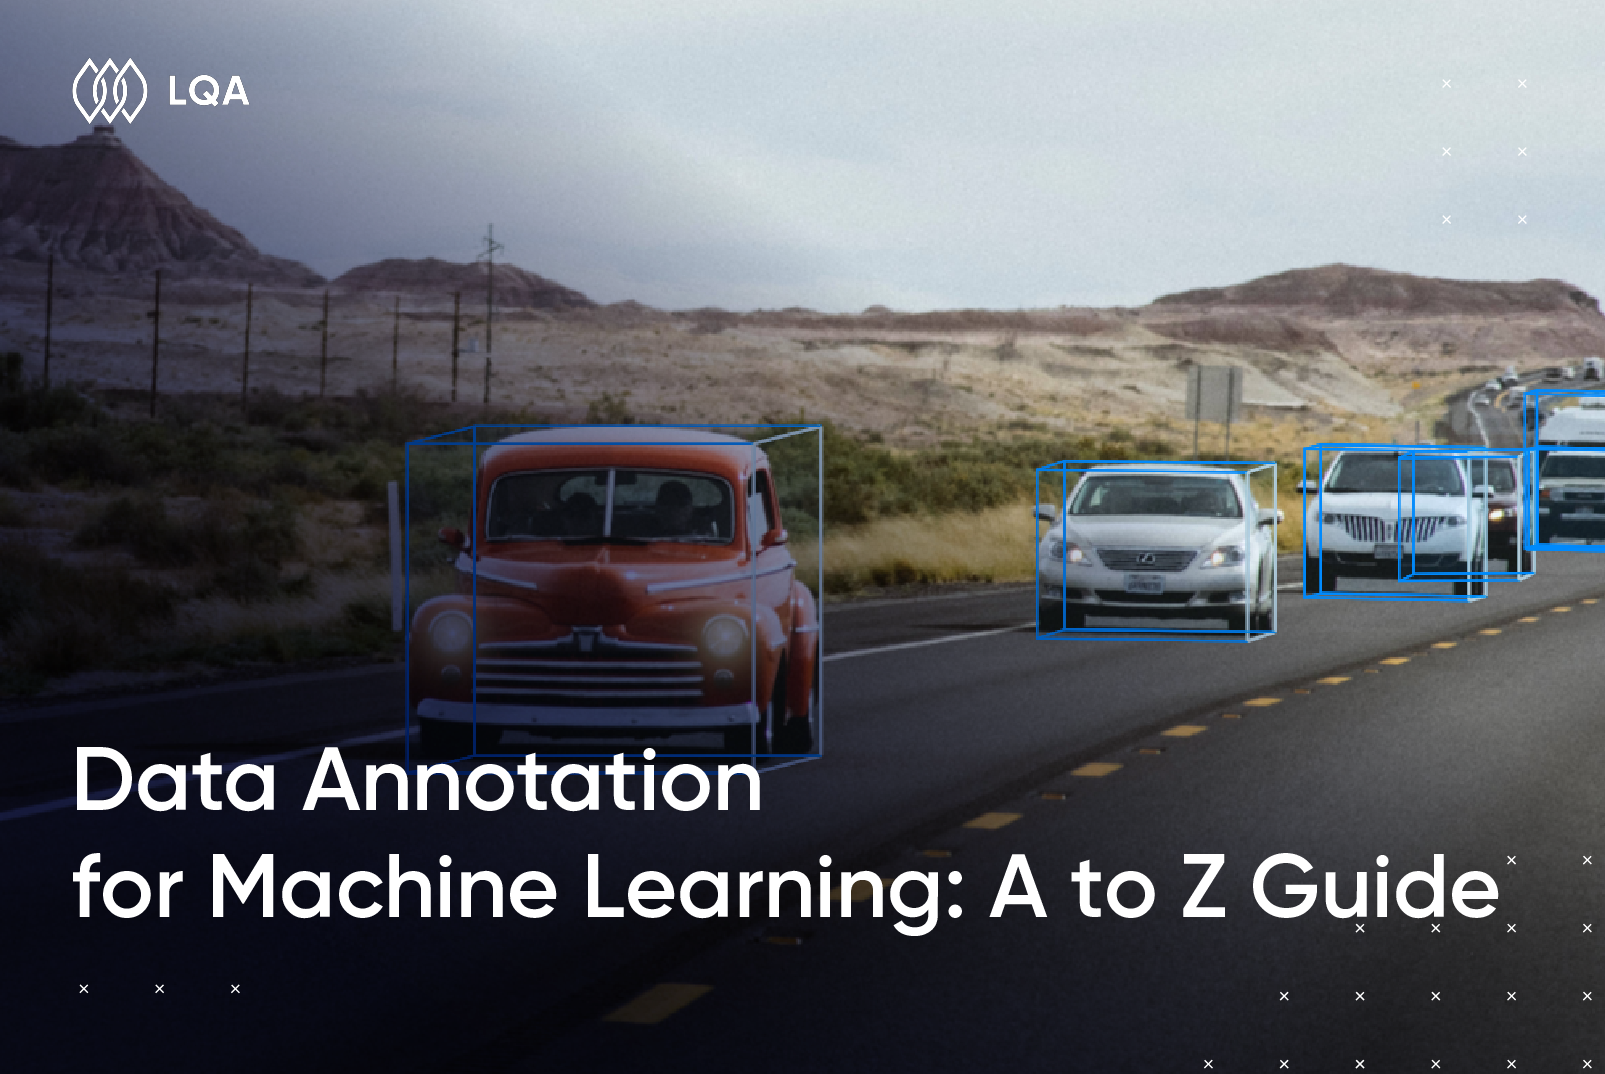 data annotation for machine learning guide